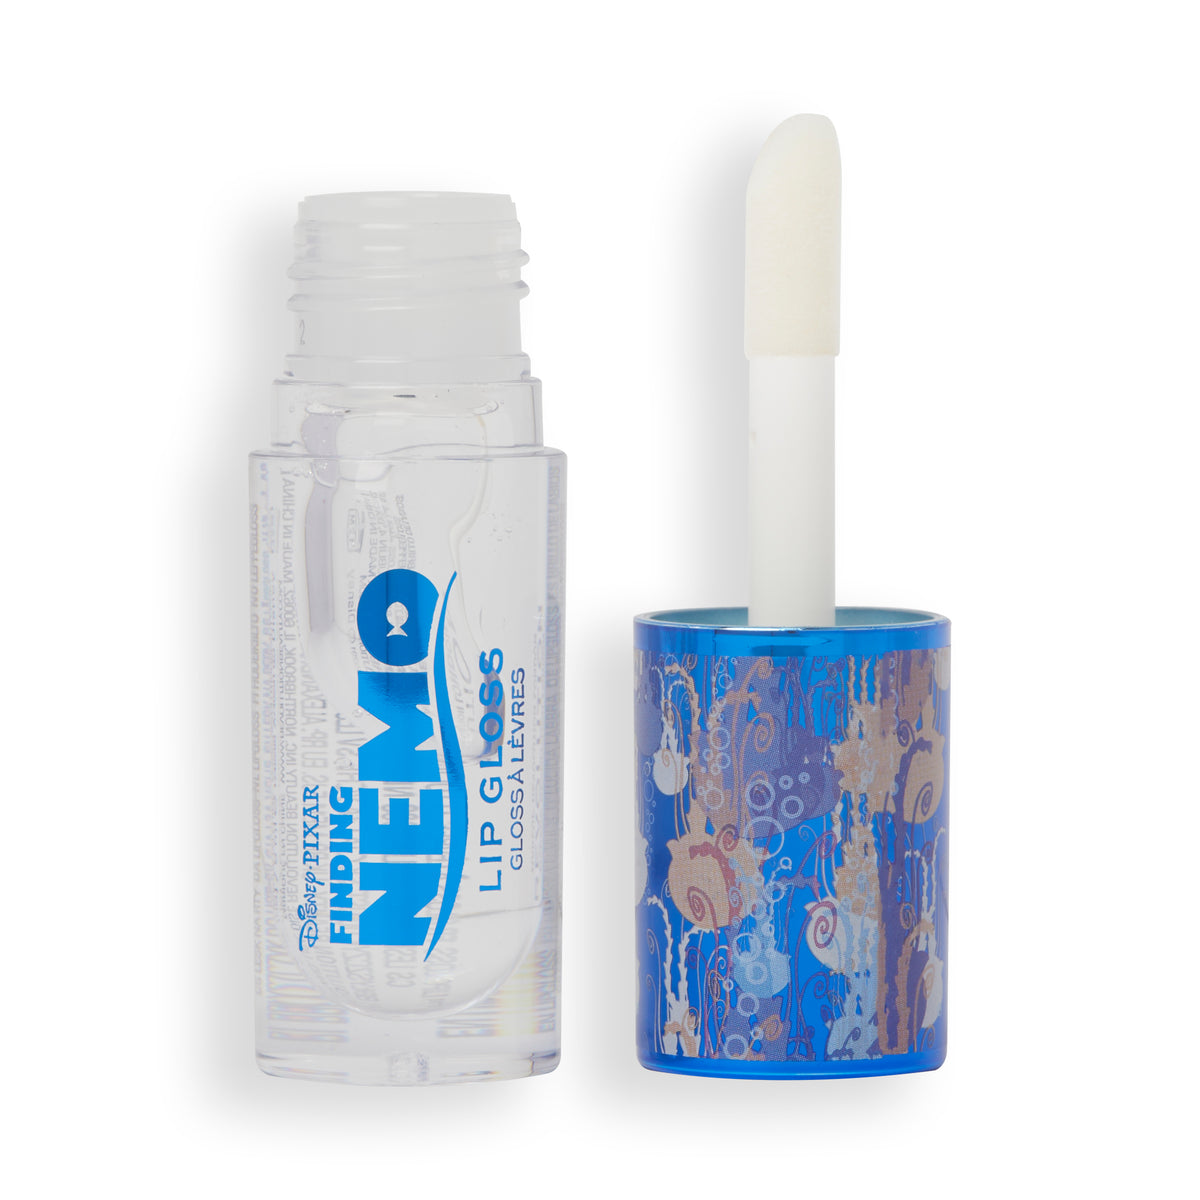 DISNEY PIXAR’S FINDING NEMO AND REVOLUTION NEMO CLEAR LIP GLOSS - OUTLET